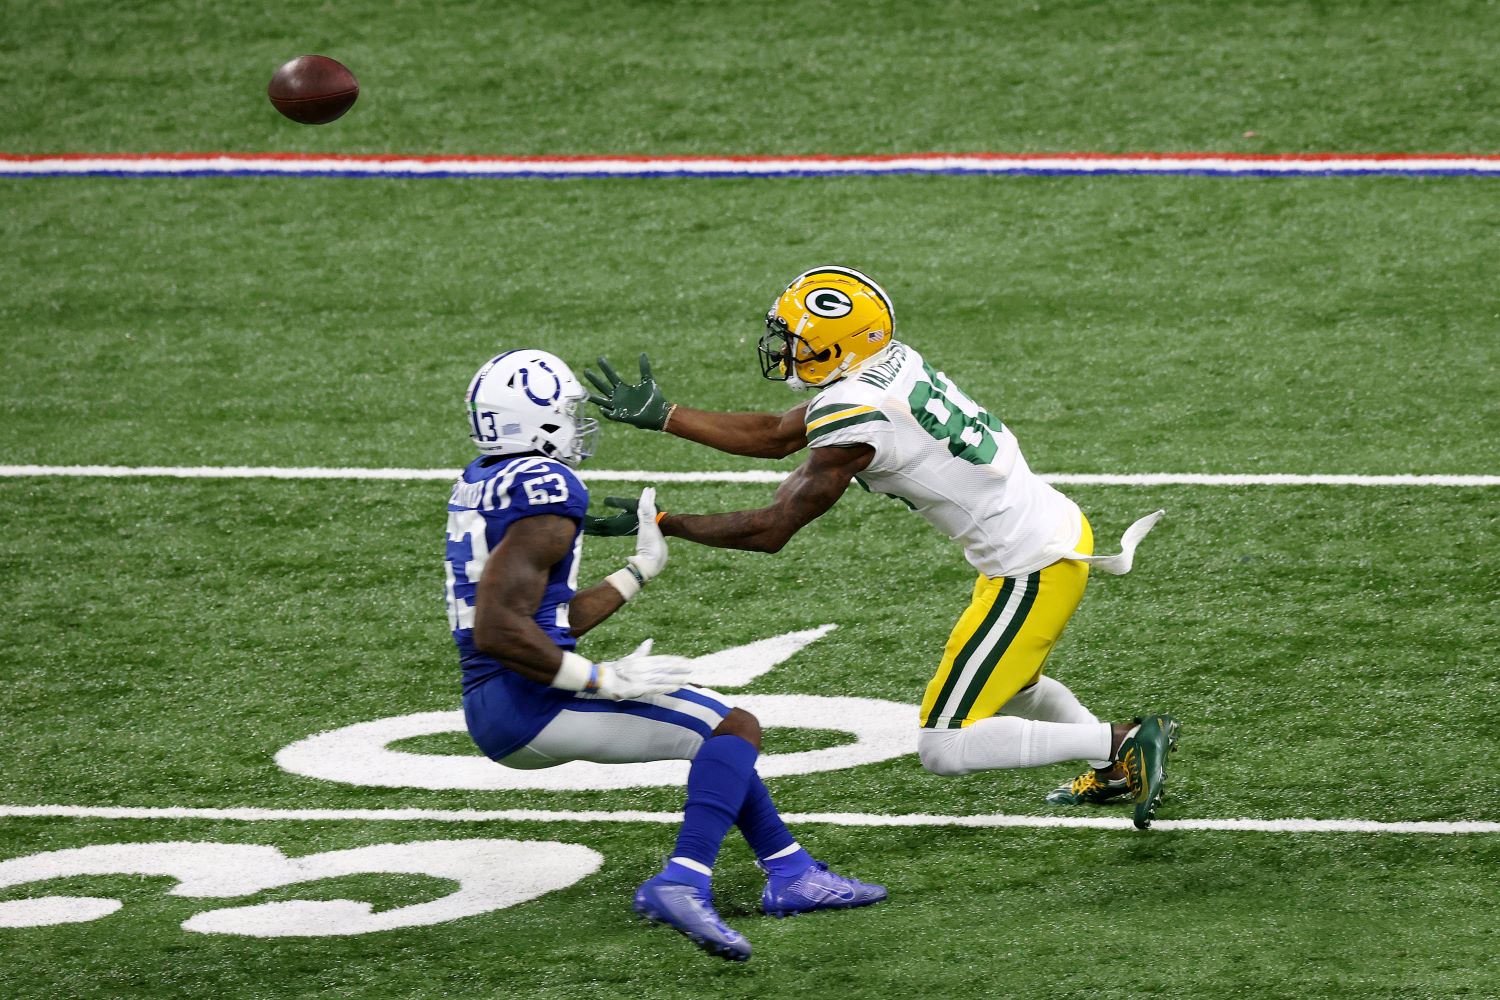 Packers WR Marquez Valdes-Scantling has received death threats after he committed a costly fumble against the Colts on Sunday.